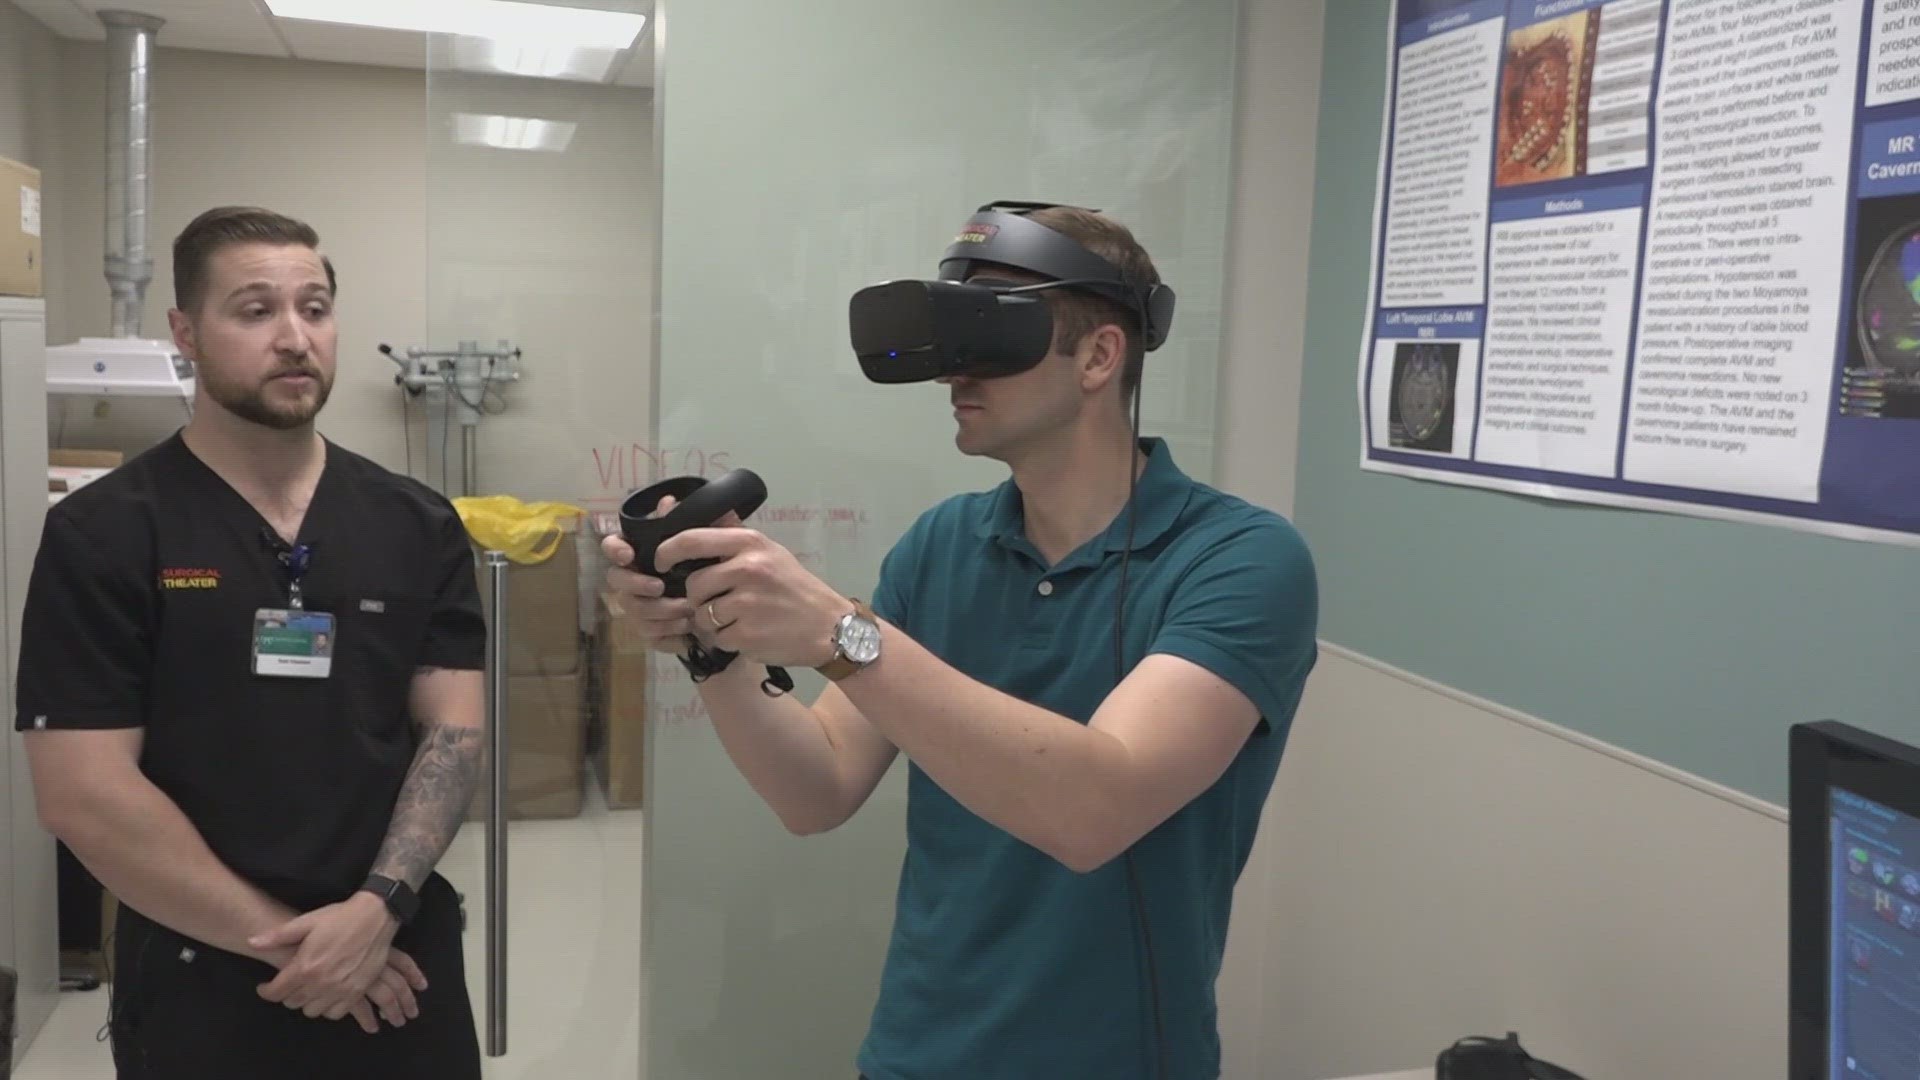 12News got a hands-on experience with the Mayo Clinic's augmented reality technology, which is used by doctors for complex medical procedures.